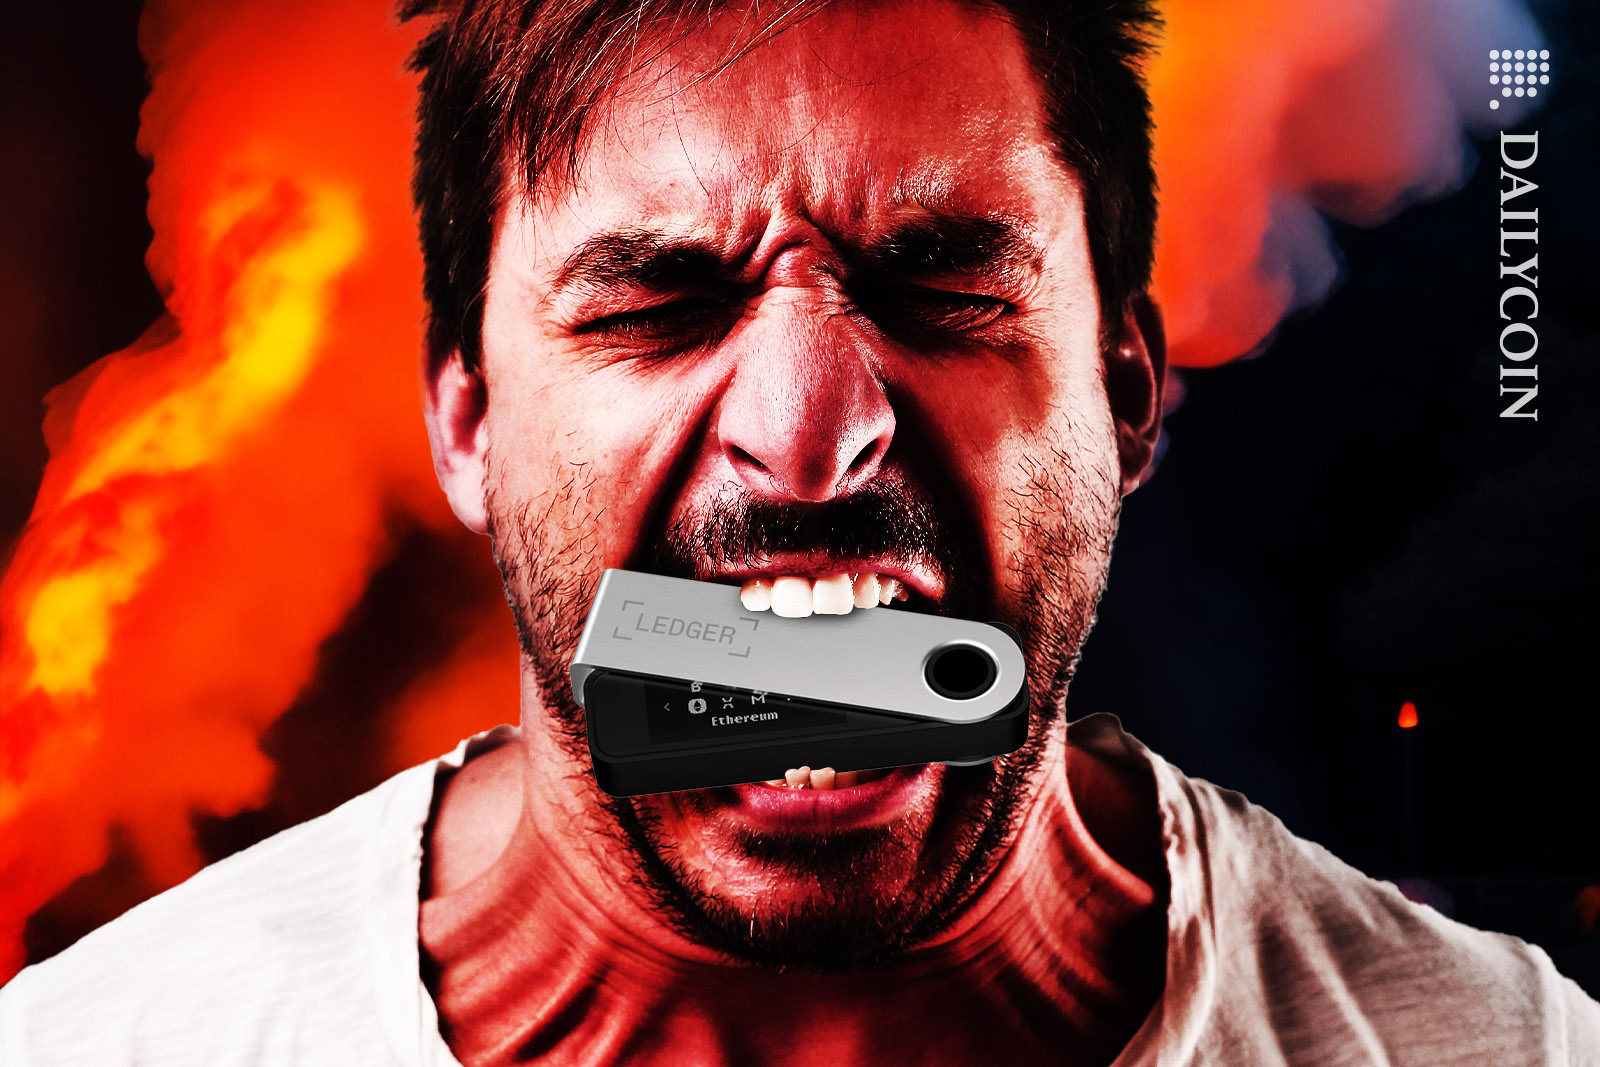 A closeup of a man red with anger, biting down on a Ledger nano in front of an inferno.